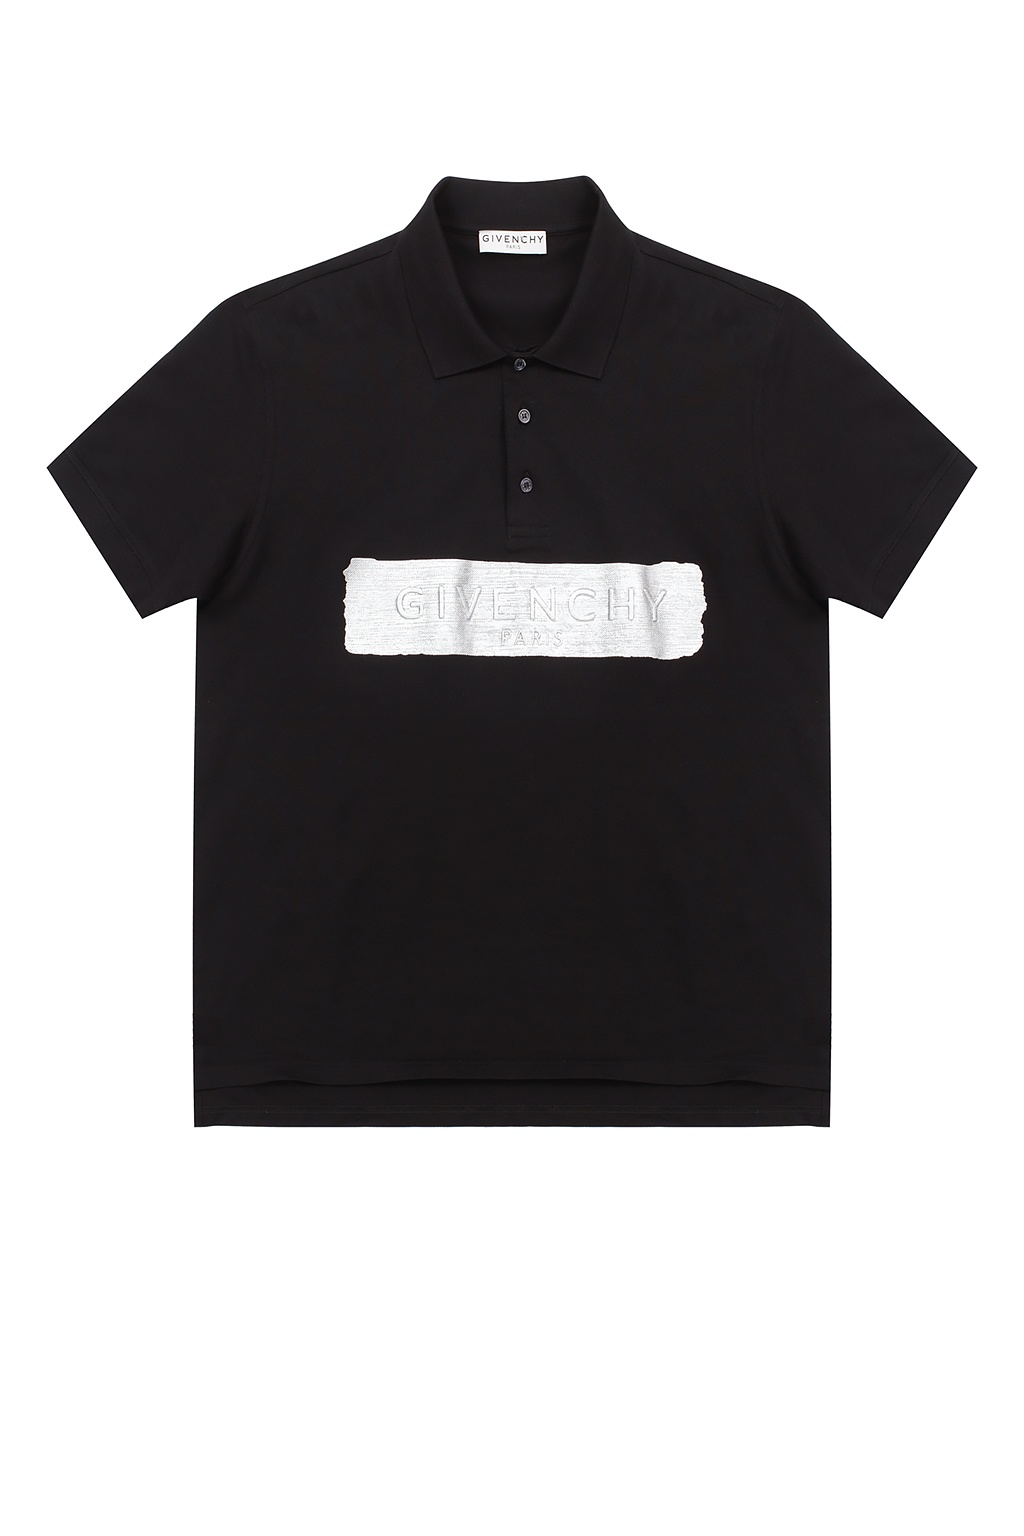 Givenchy Polo shirt with logo | Men's Clothing | IetpShops